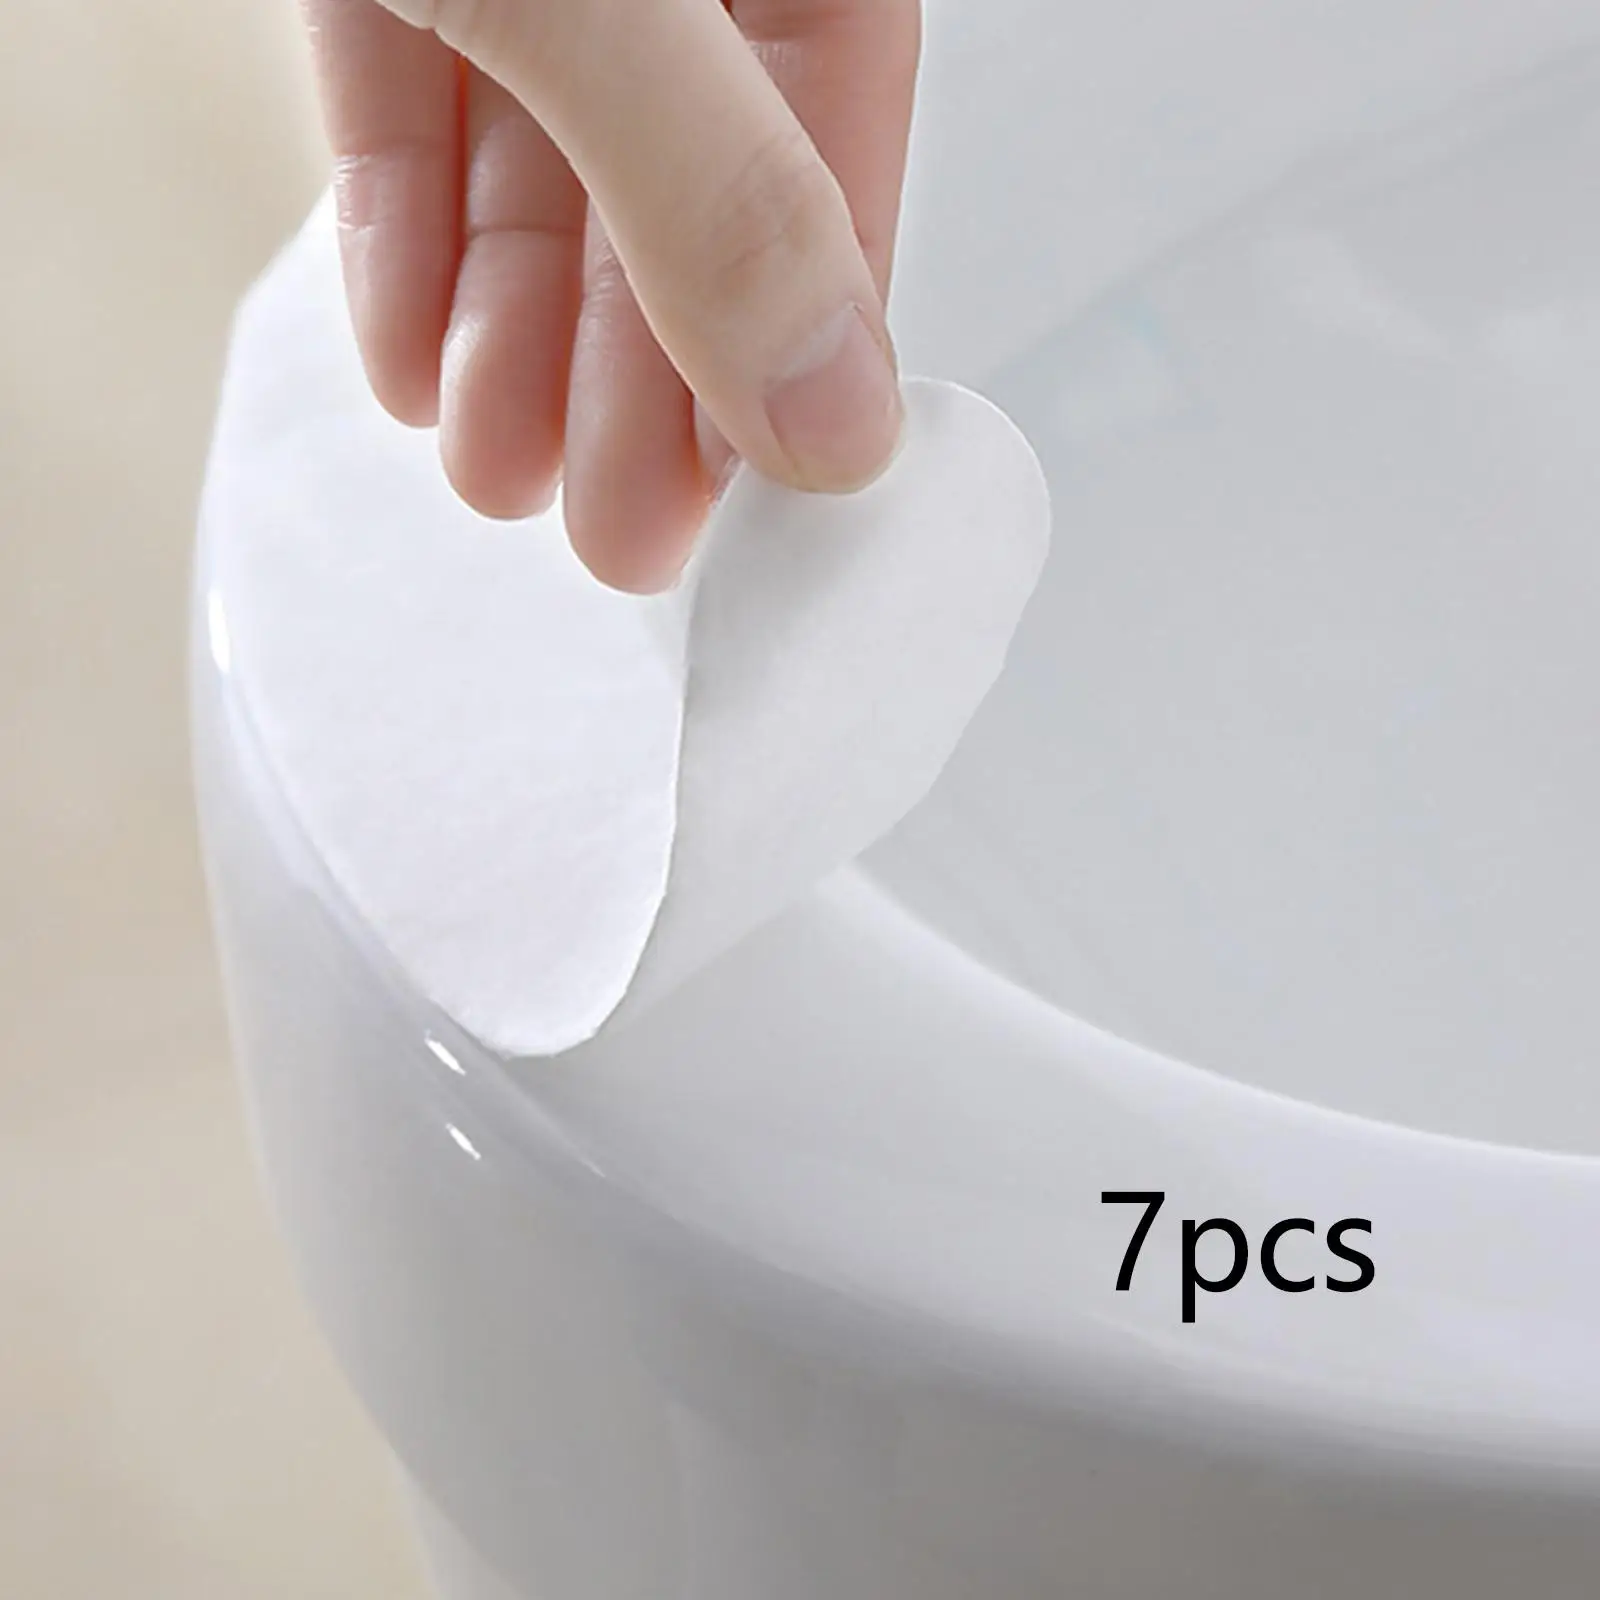 Portable Toilet pad Pad for Children to Suck Urine Reusable Comfortable Potty Seat Covers for Traveling Kids Boys